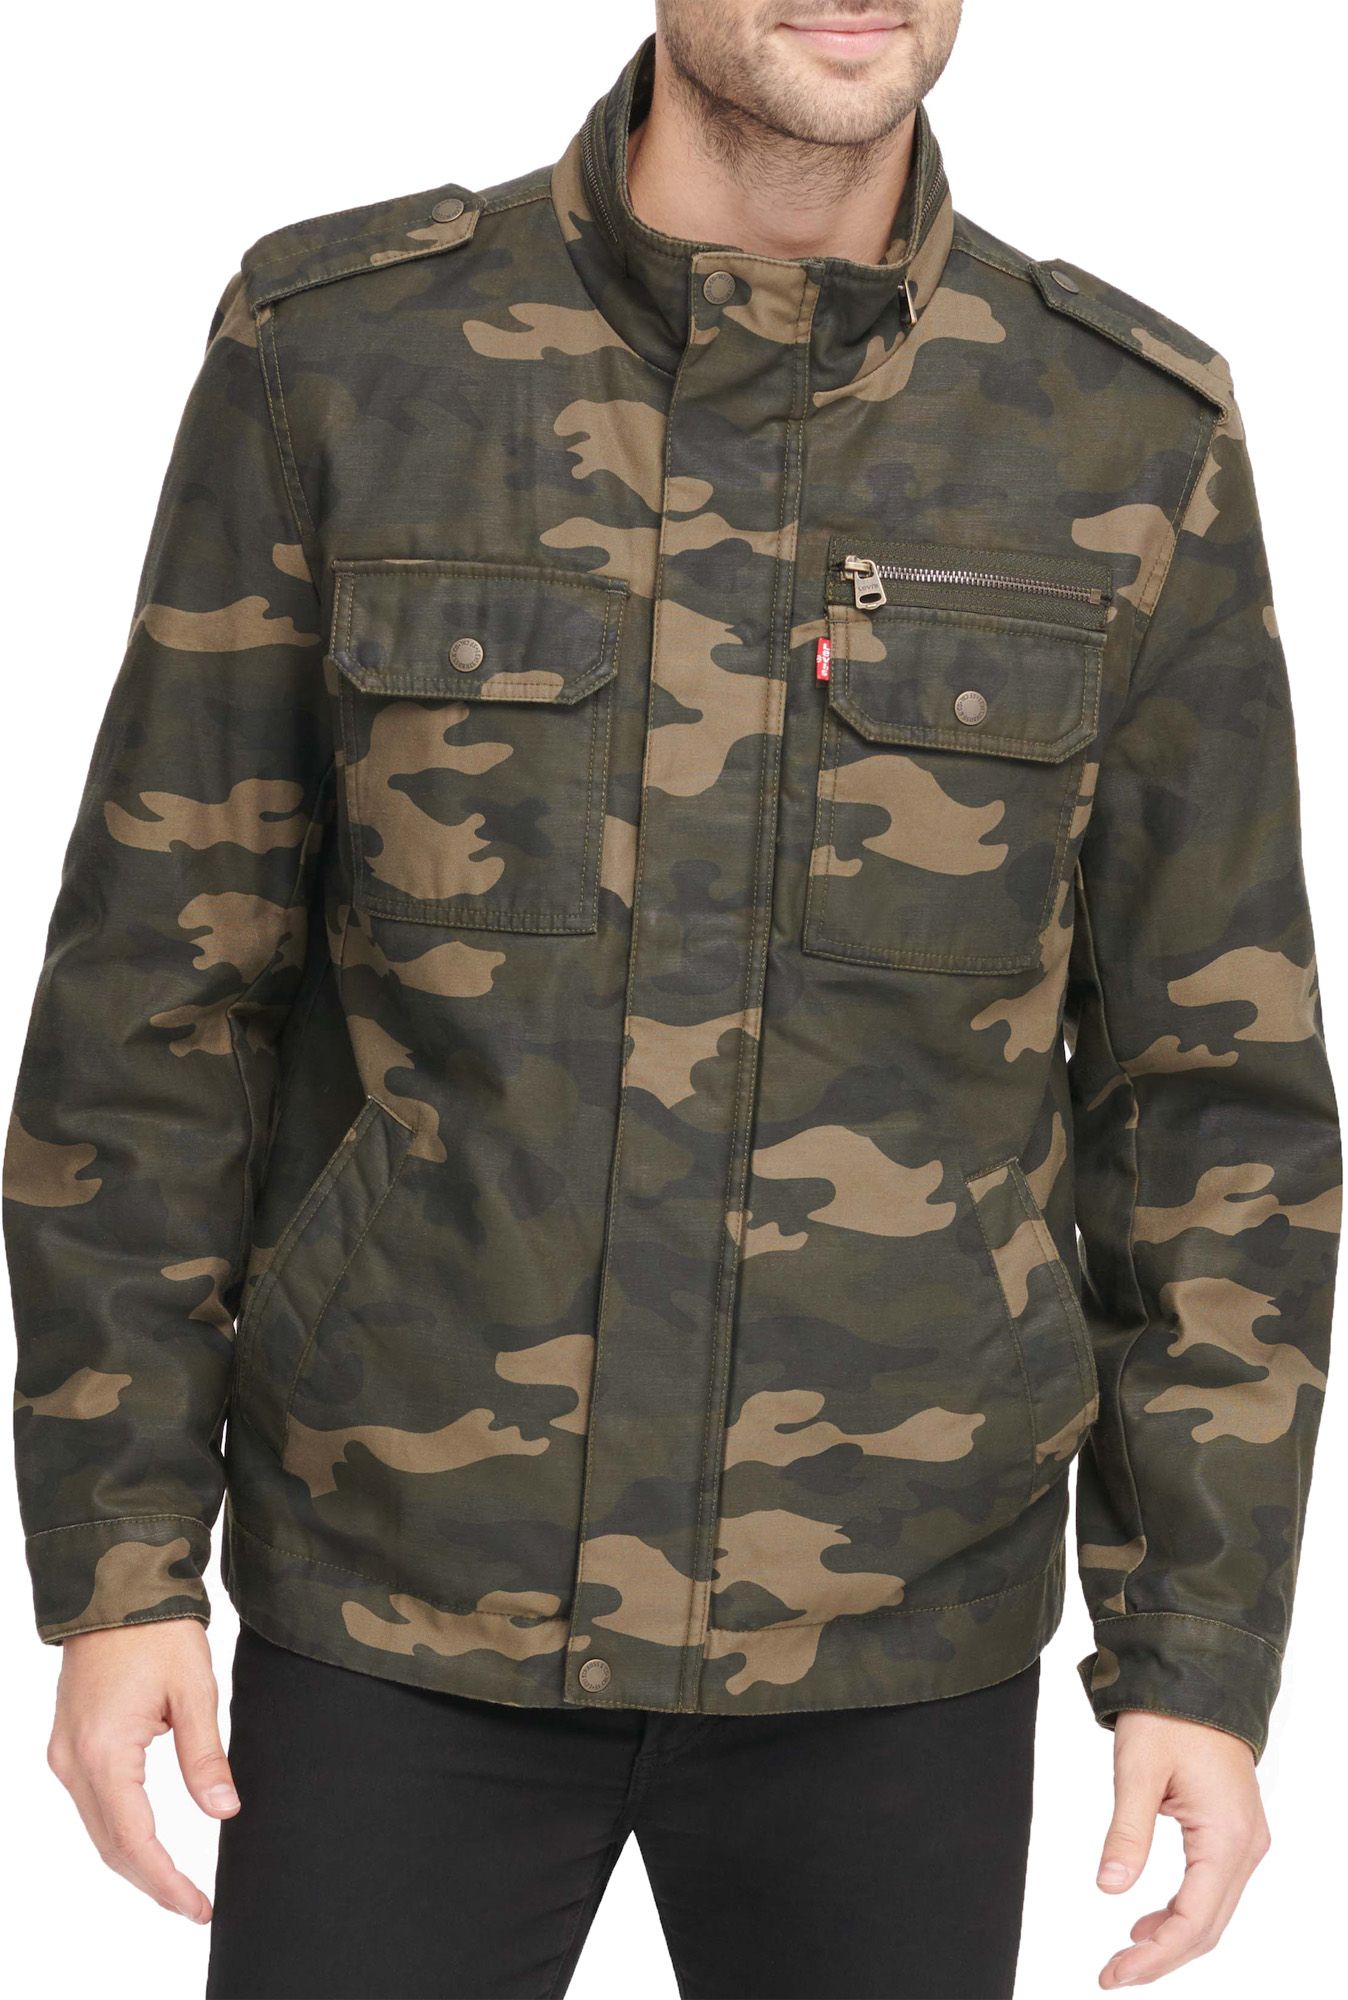 military discount levis